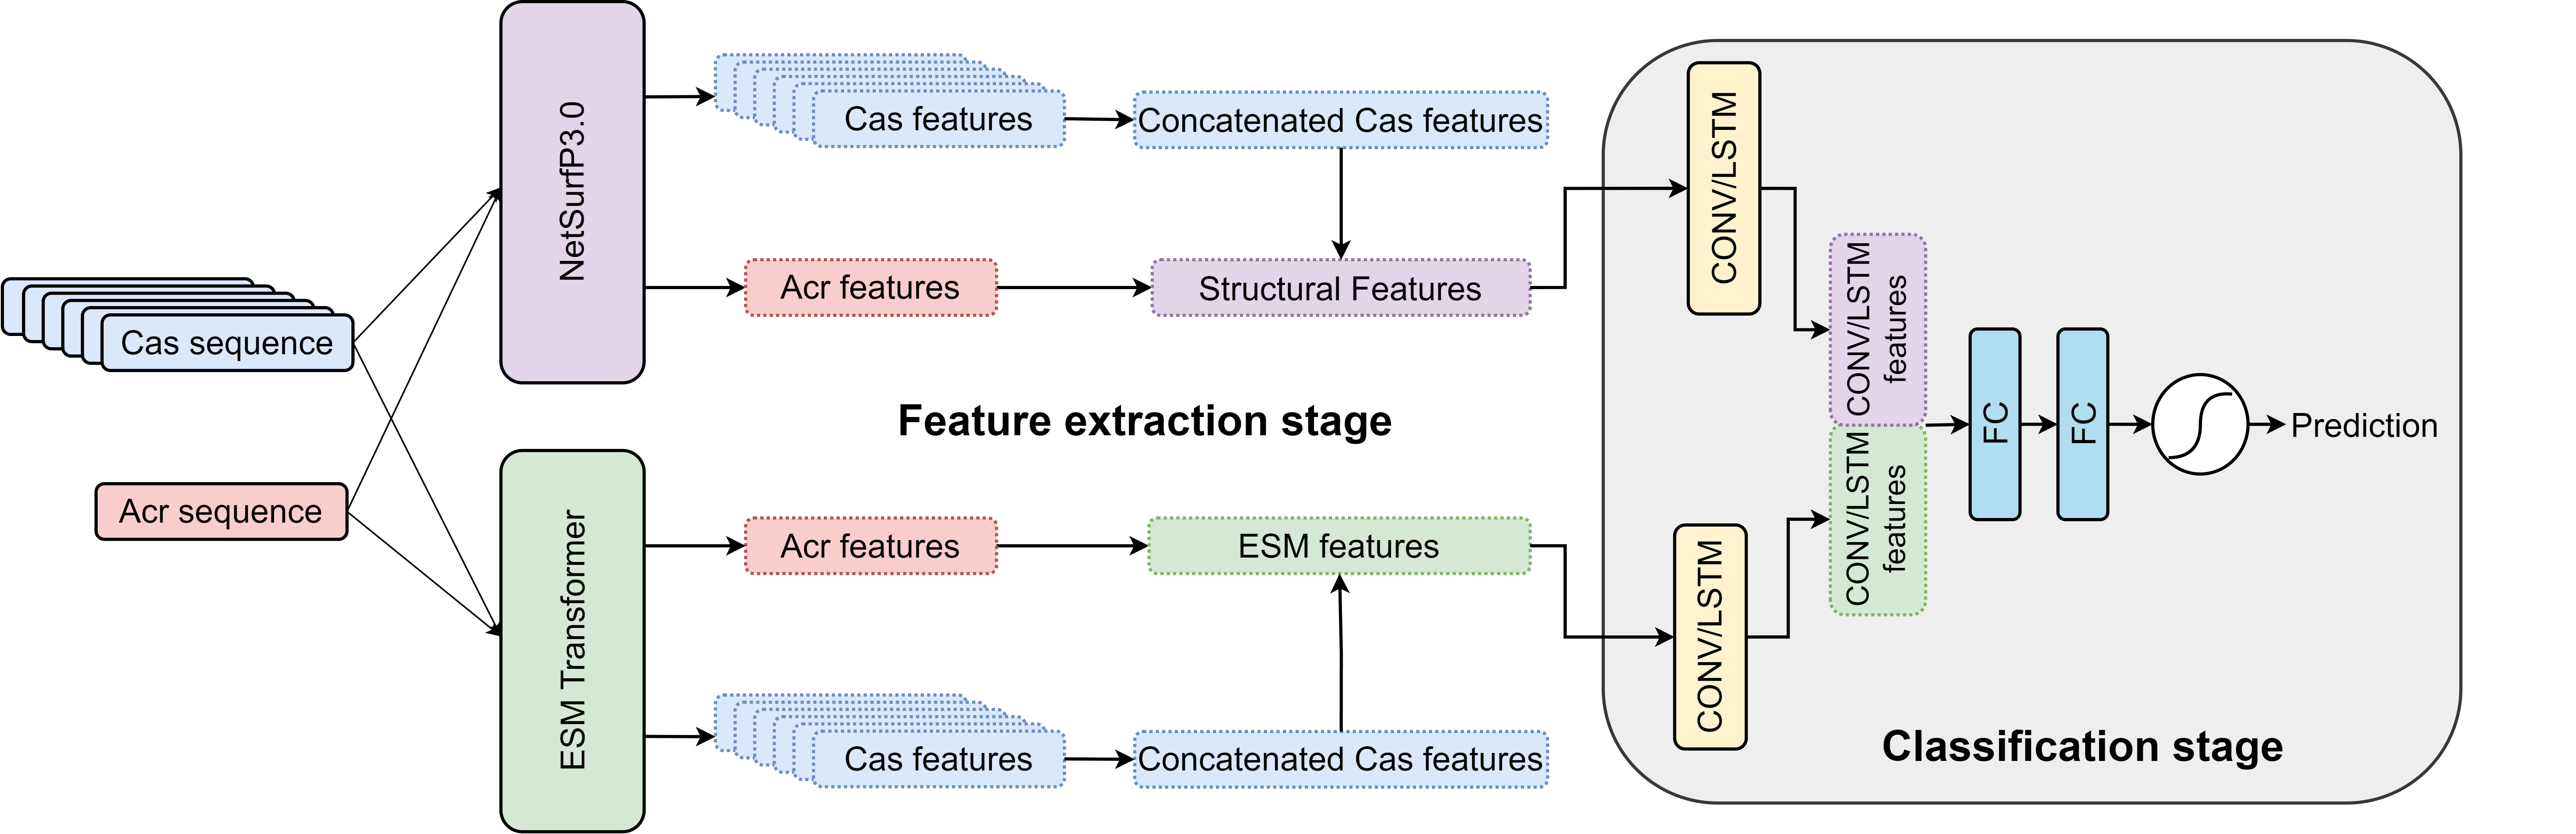 The architecture of the AcrTransAct model. The sequence features are extracted in the first stage and passed to the second stage where
                        the structural and ESM features are separately processed by CONV or LSTM layers and later
                        concatenated and fed to FC layers. The classification network generates the probability of the
                        input Acr sequence inhibiting the input CRISPR-Cas system.